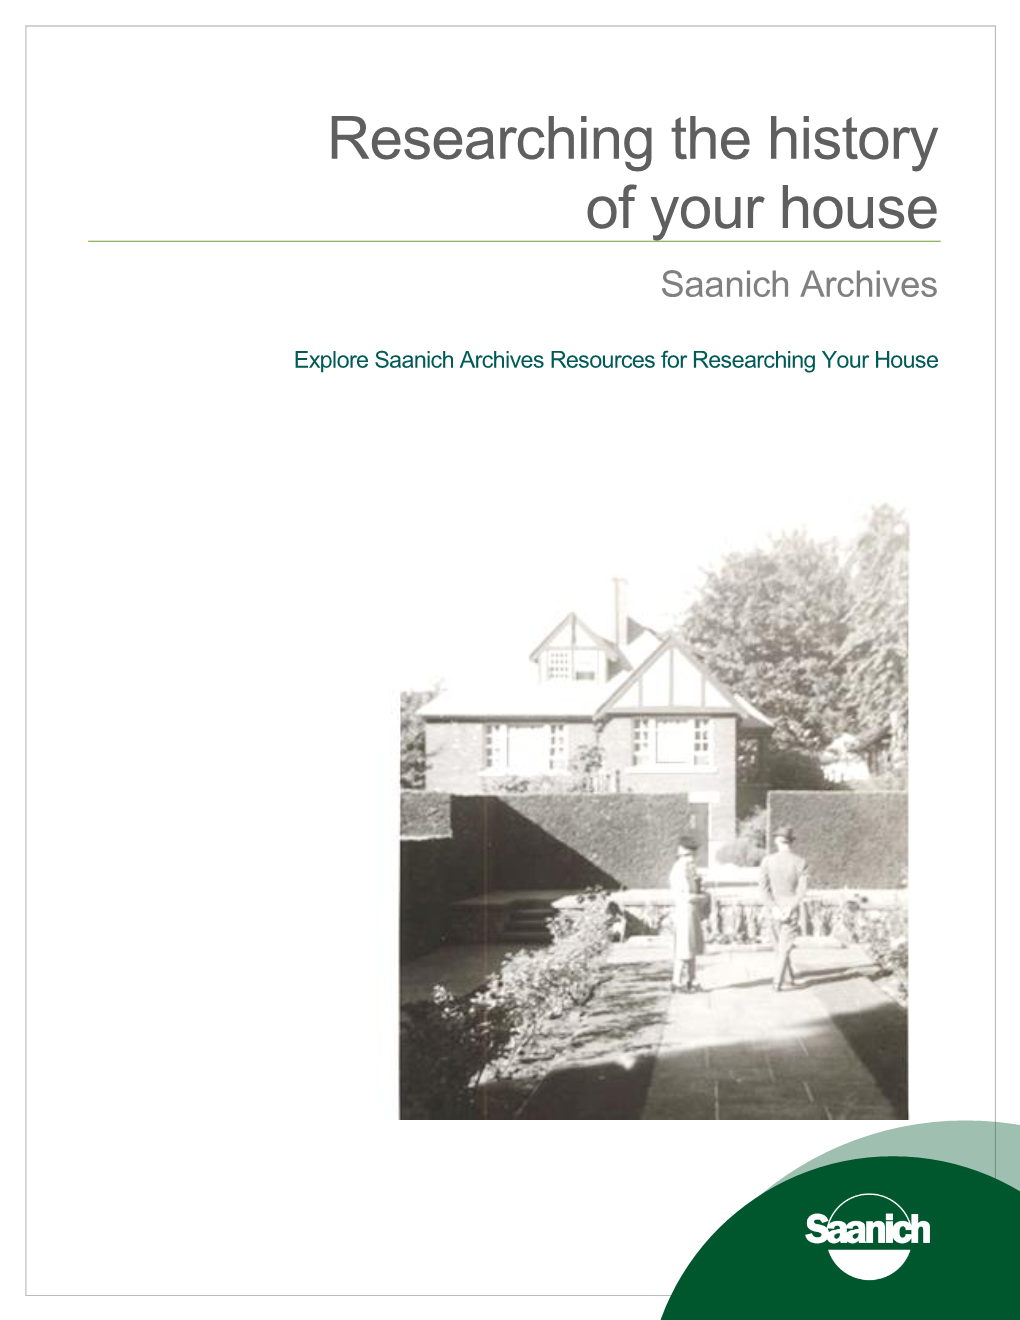 Researching the History of Your House